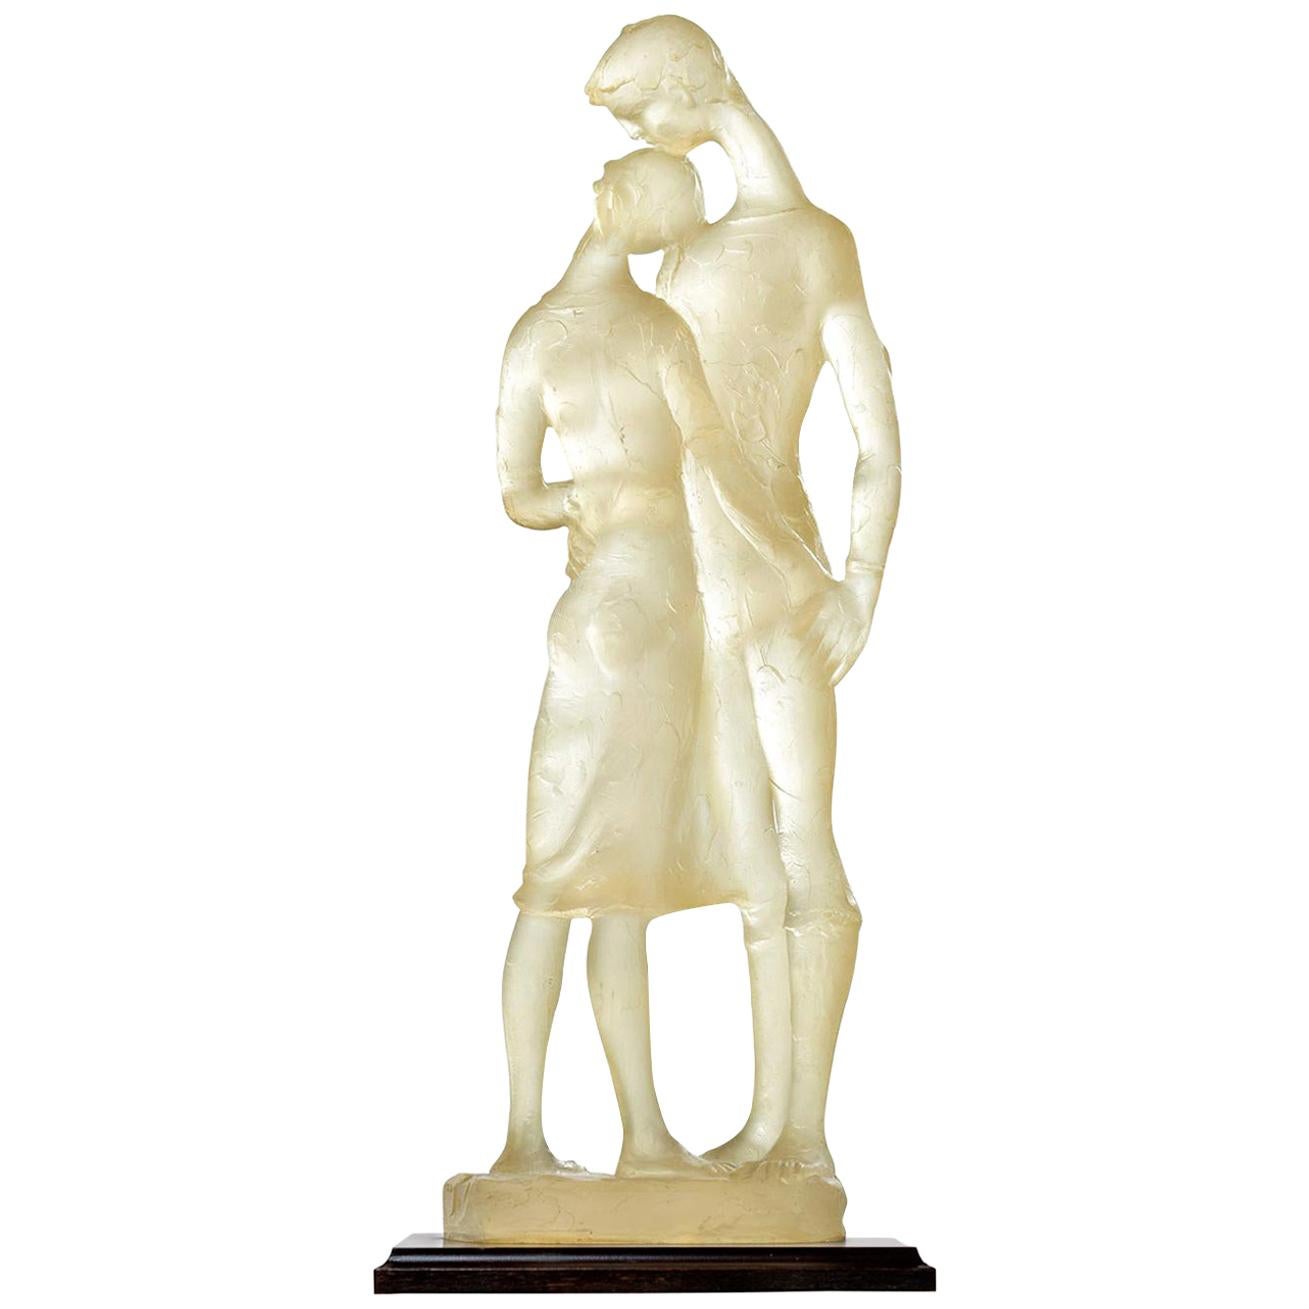 Beautiful man and woman in tender embrace. Slightly elongated modern figural sculpture formed in a clear resin and mounted to a wood base. 

Although clearly numbered and stamped, our staff was incapable of uncovering the artist or manufacturer.